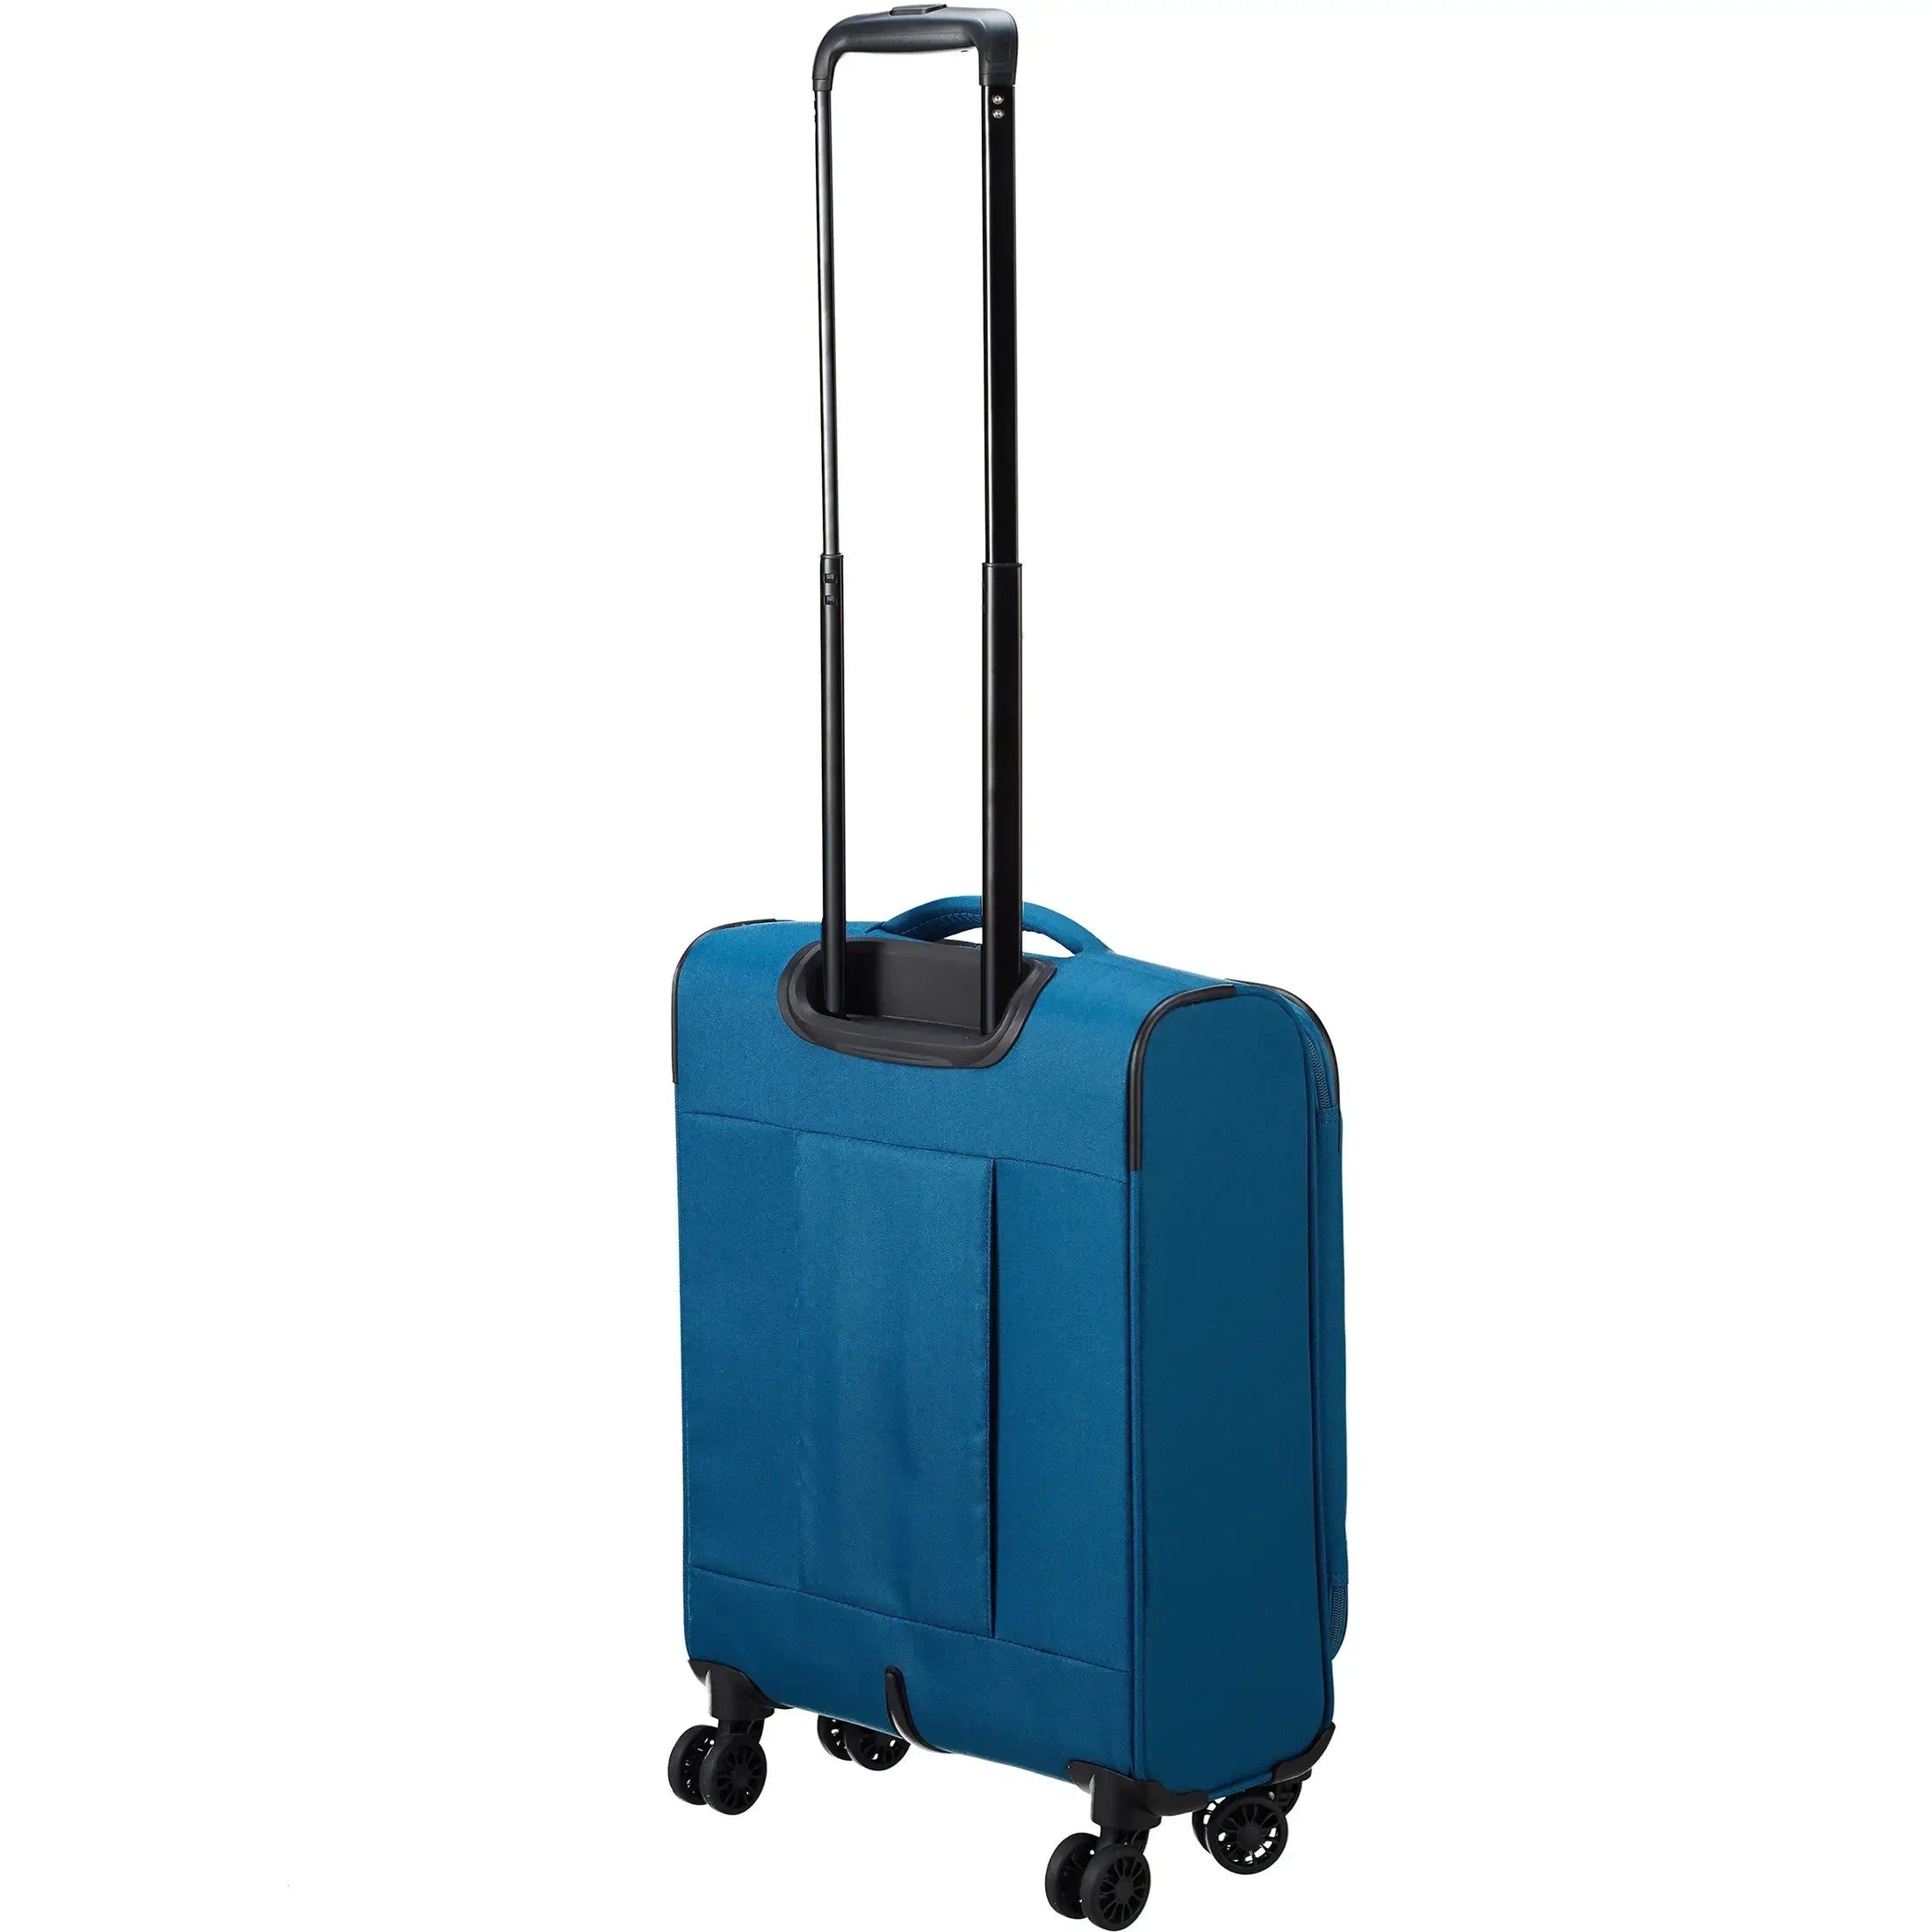 Travelite Chios 4-Rollen Kabinentrolley S 55 cm - Rot